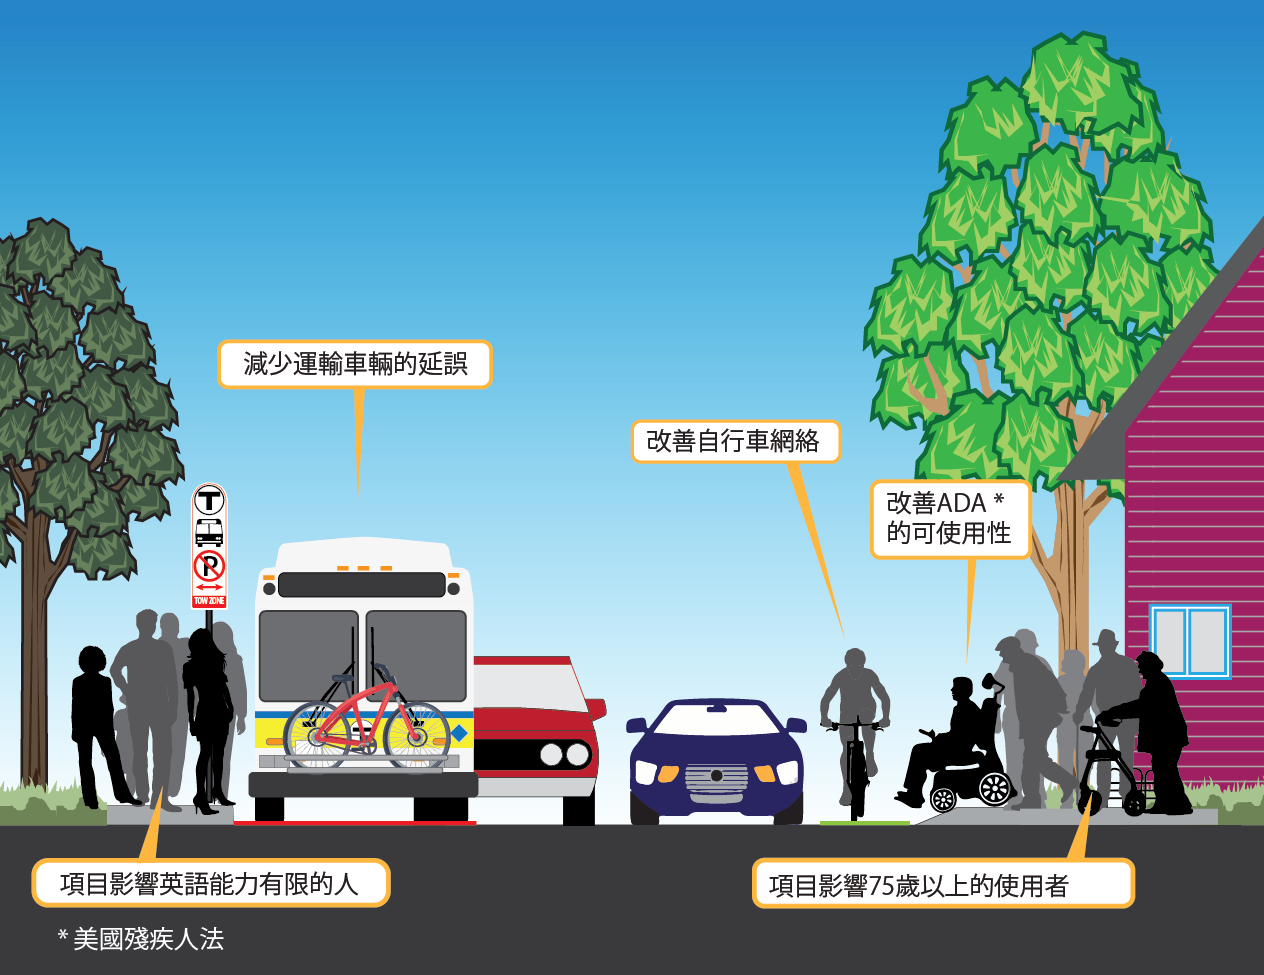 The Transportation Equity image shows a cross section of a street with a bus stop, bus lane, two roadway lanes, a bike lane, and curb extension to improve accessibility. The image shows people waiting at the bus stop, riding in the bike lane, and using the curb extension to cross the street.